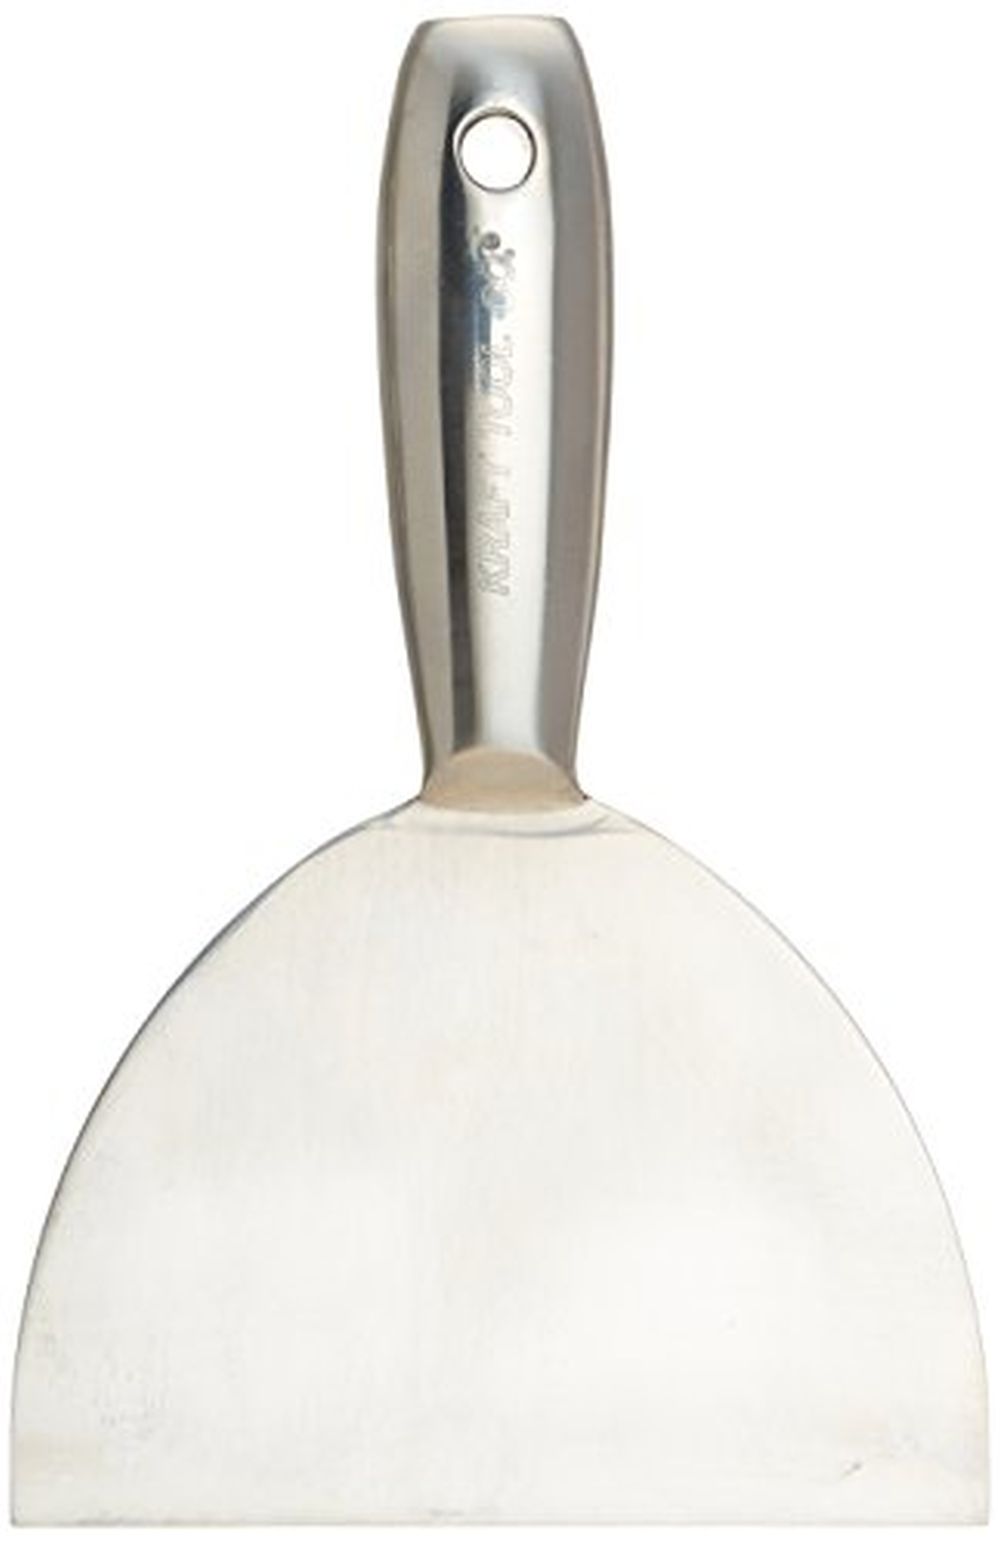 Kraft DW733 All Stainless Joint Knife, 6" - image 1 of 3